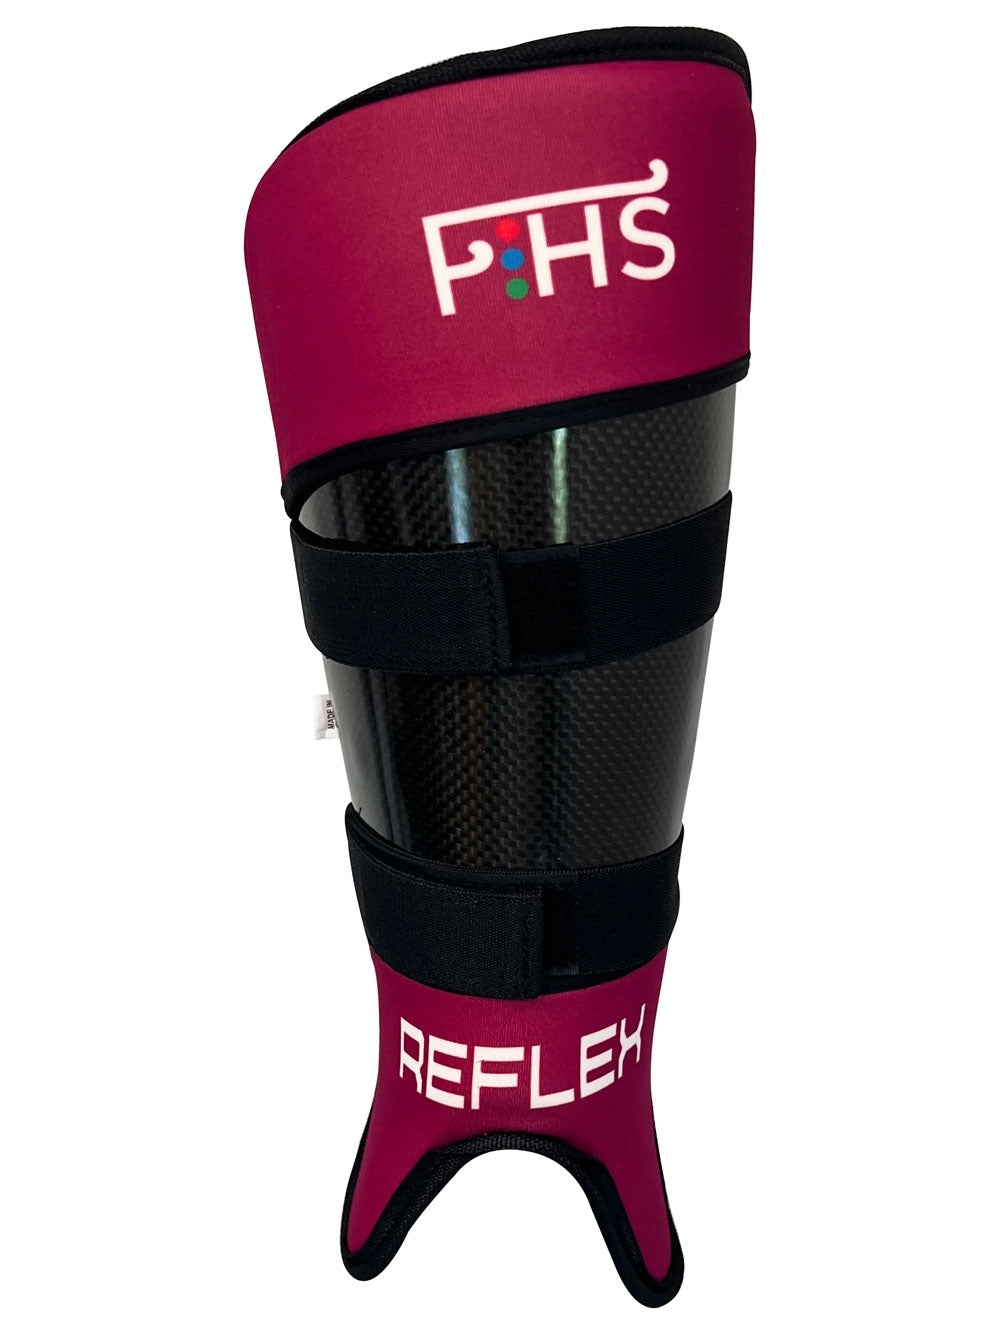 Field Hockey Insertable Covers with Straps Carbon Shin Guards Reflex Magenta